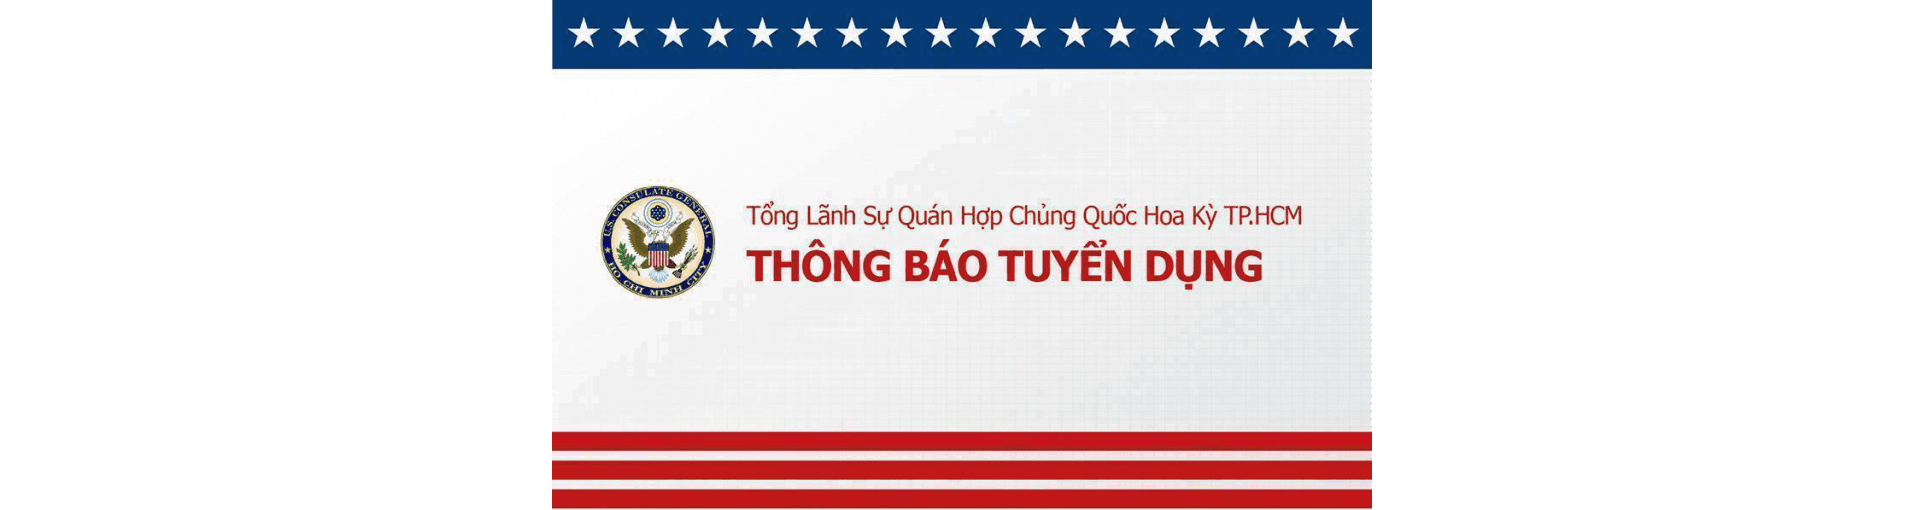 Consulate General of The United States of America Ho Chi Minh City